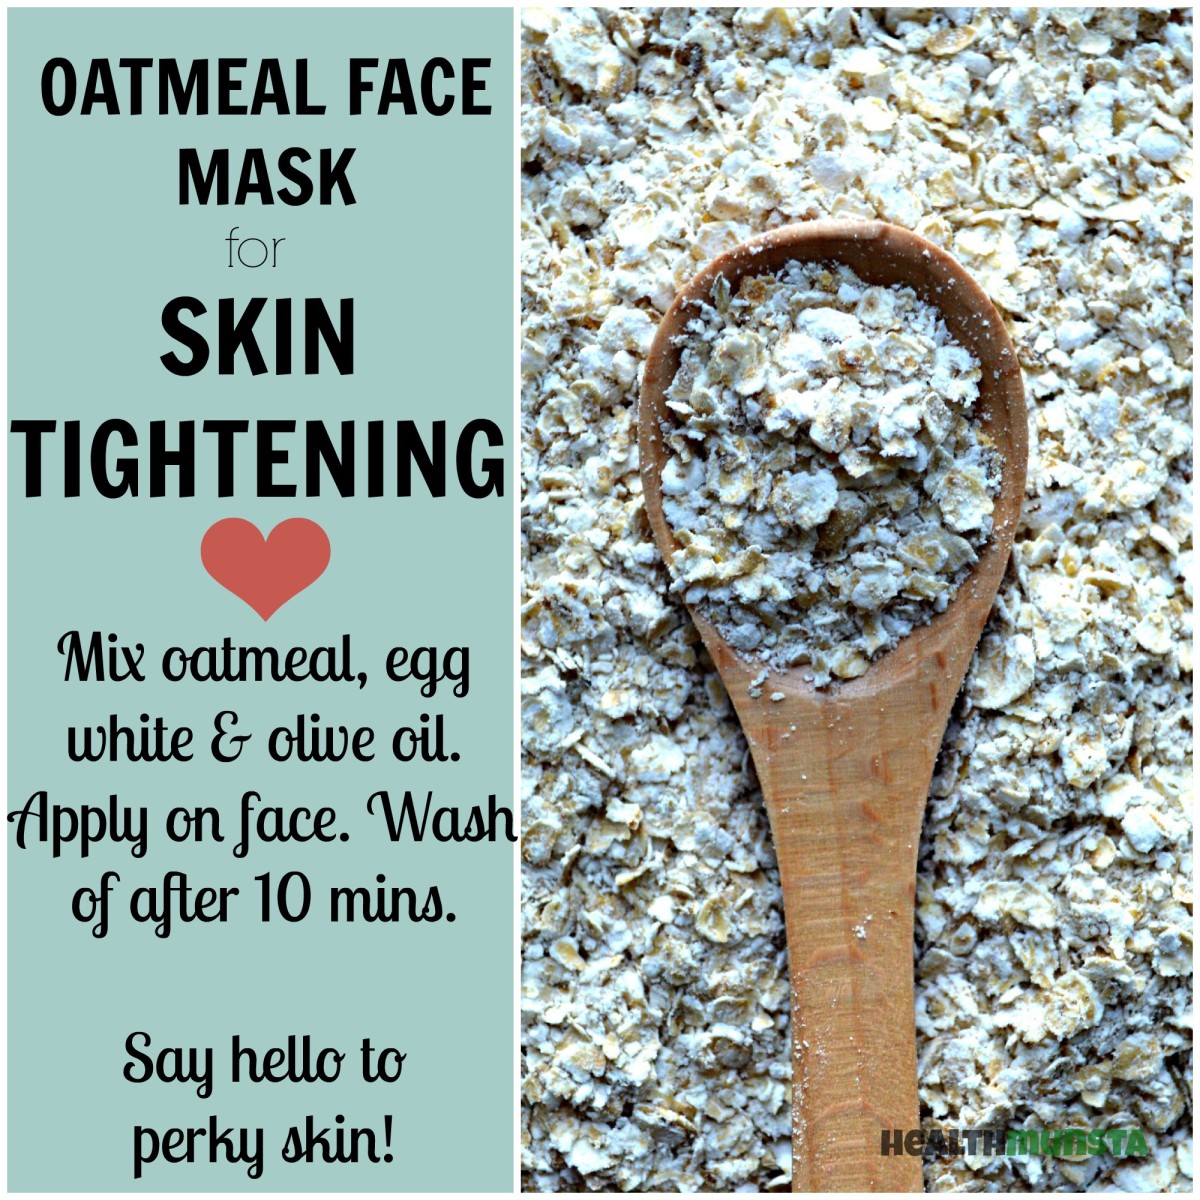 Plump up dull, lifeless skin and firm up your skin cells with a simple oatmeal face mask containing egg white and olive oil!